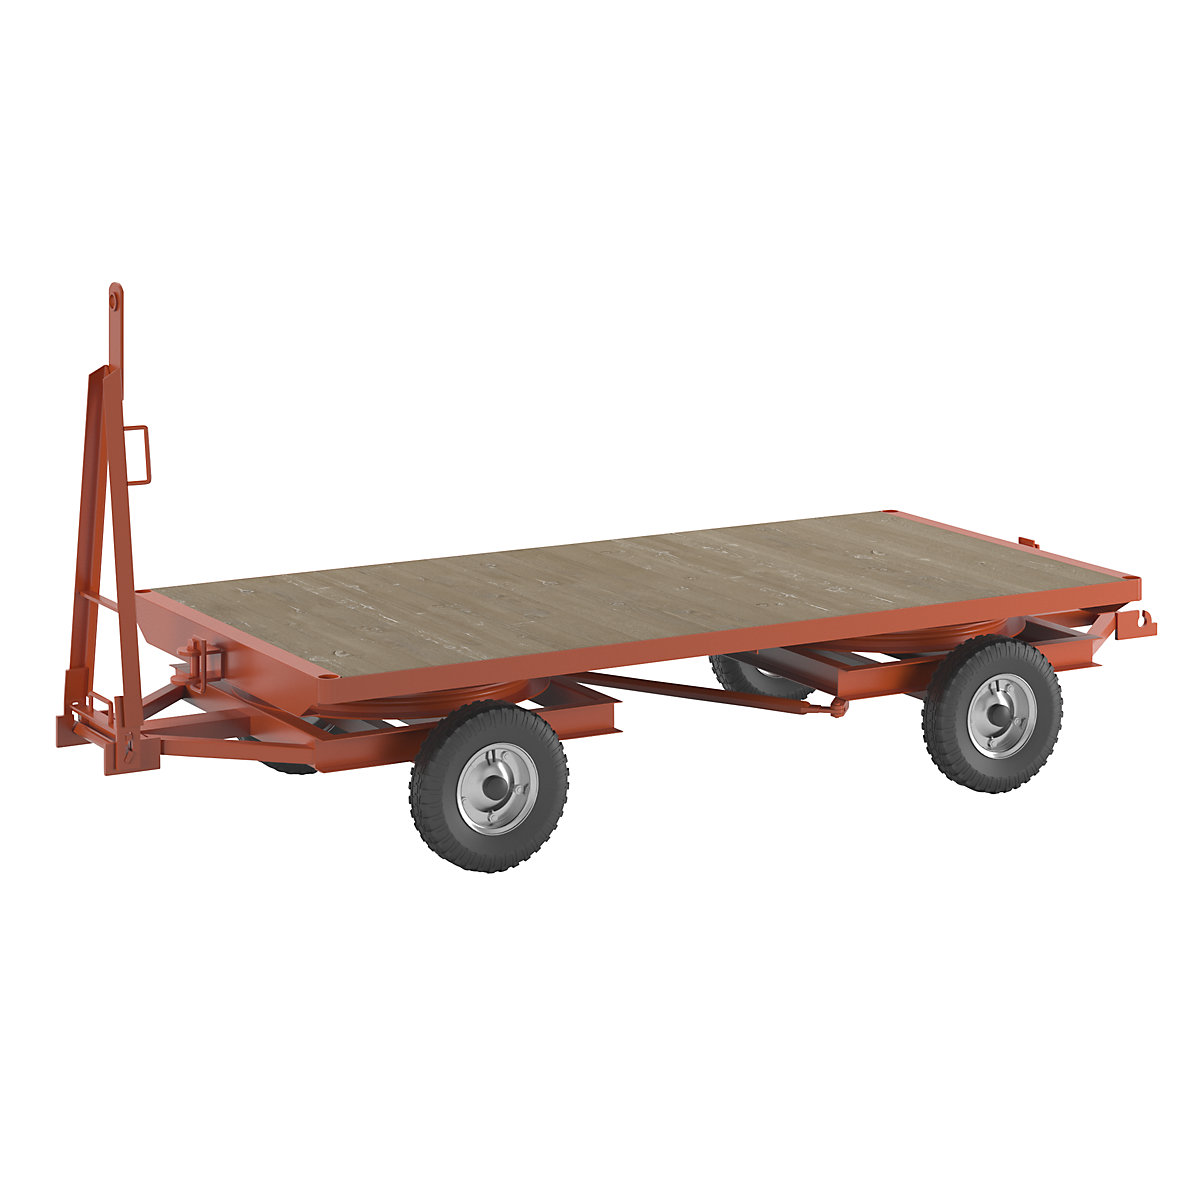 Trailer, 4-wheel double turntable steering, max. load 3 t, platform 2.5 x 1.25 m, pneumatic tyres-18